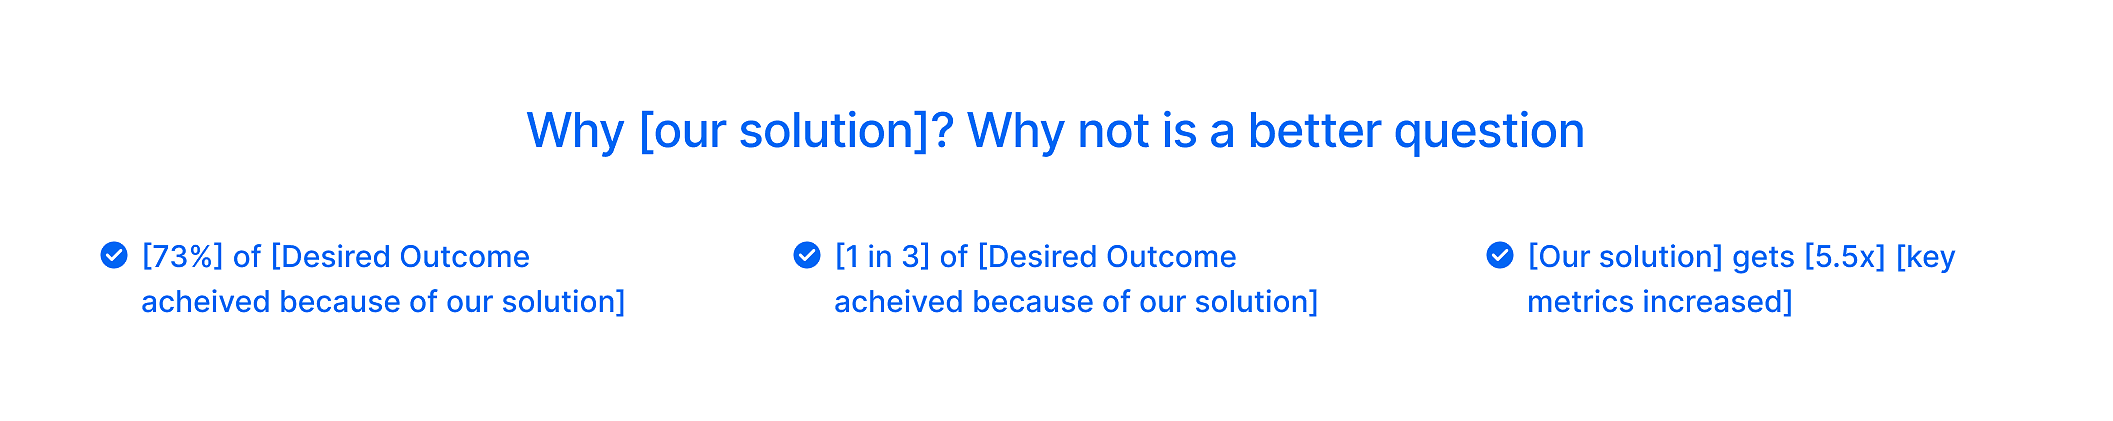 Blueprint of why choose our solution